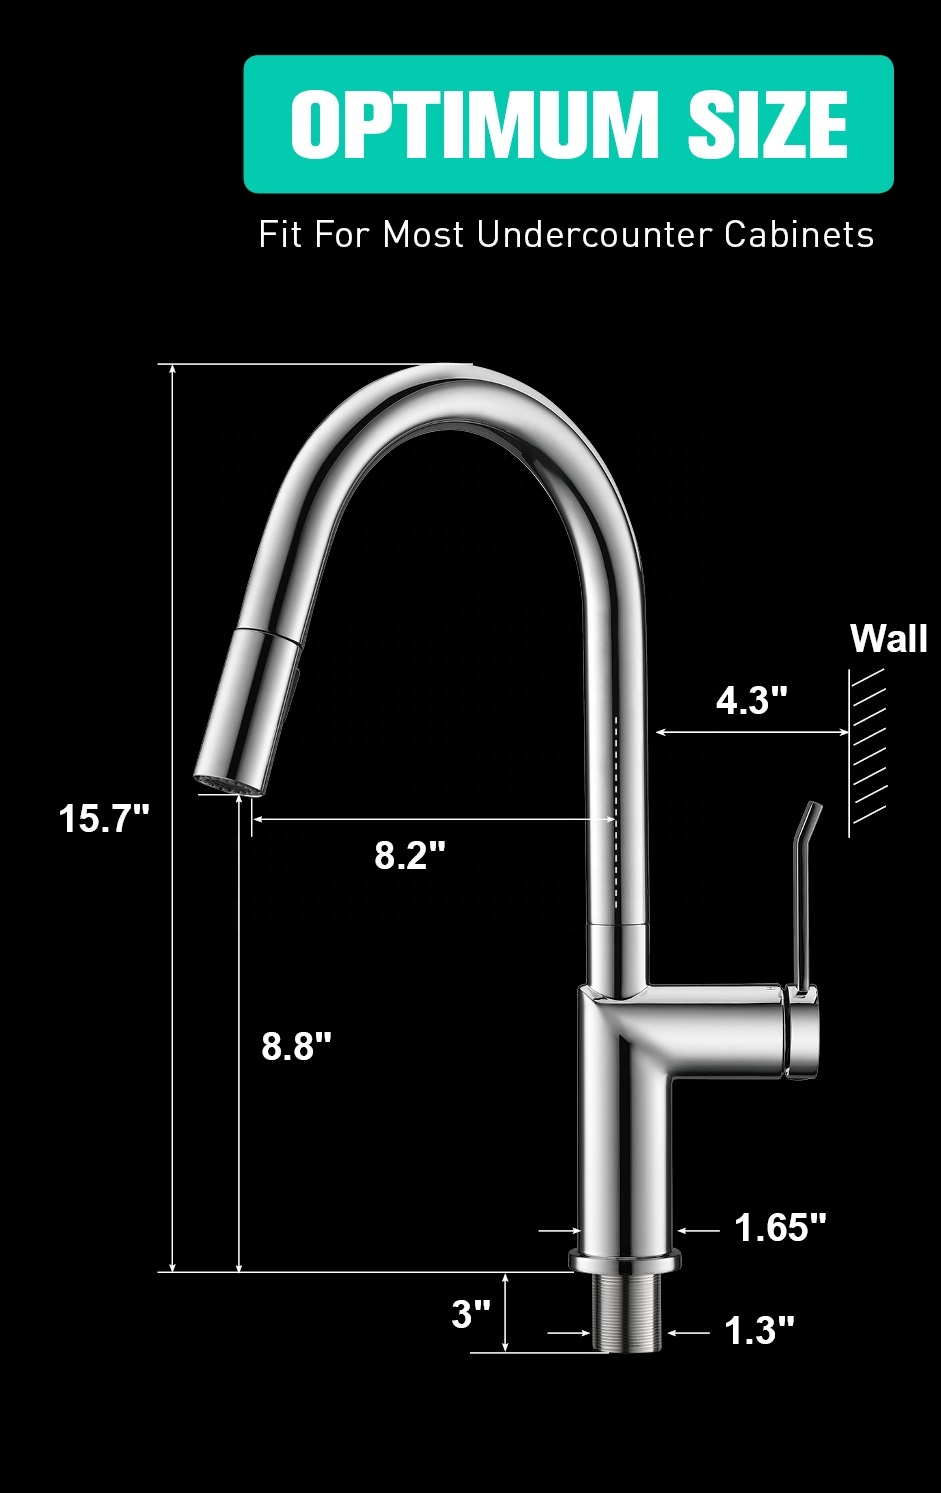 Professional Kitchen Faucet Hot And Cold Pull Stainless Steel Faucet Pullout Kitchen Faucet